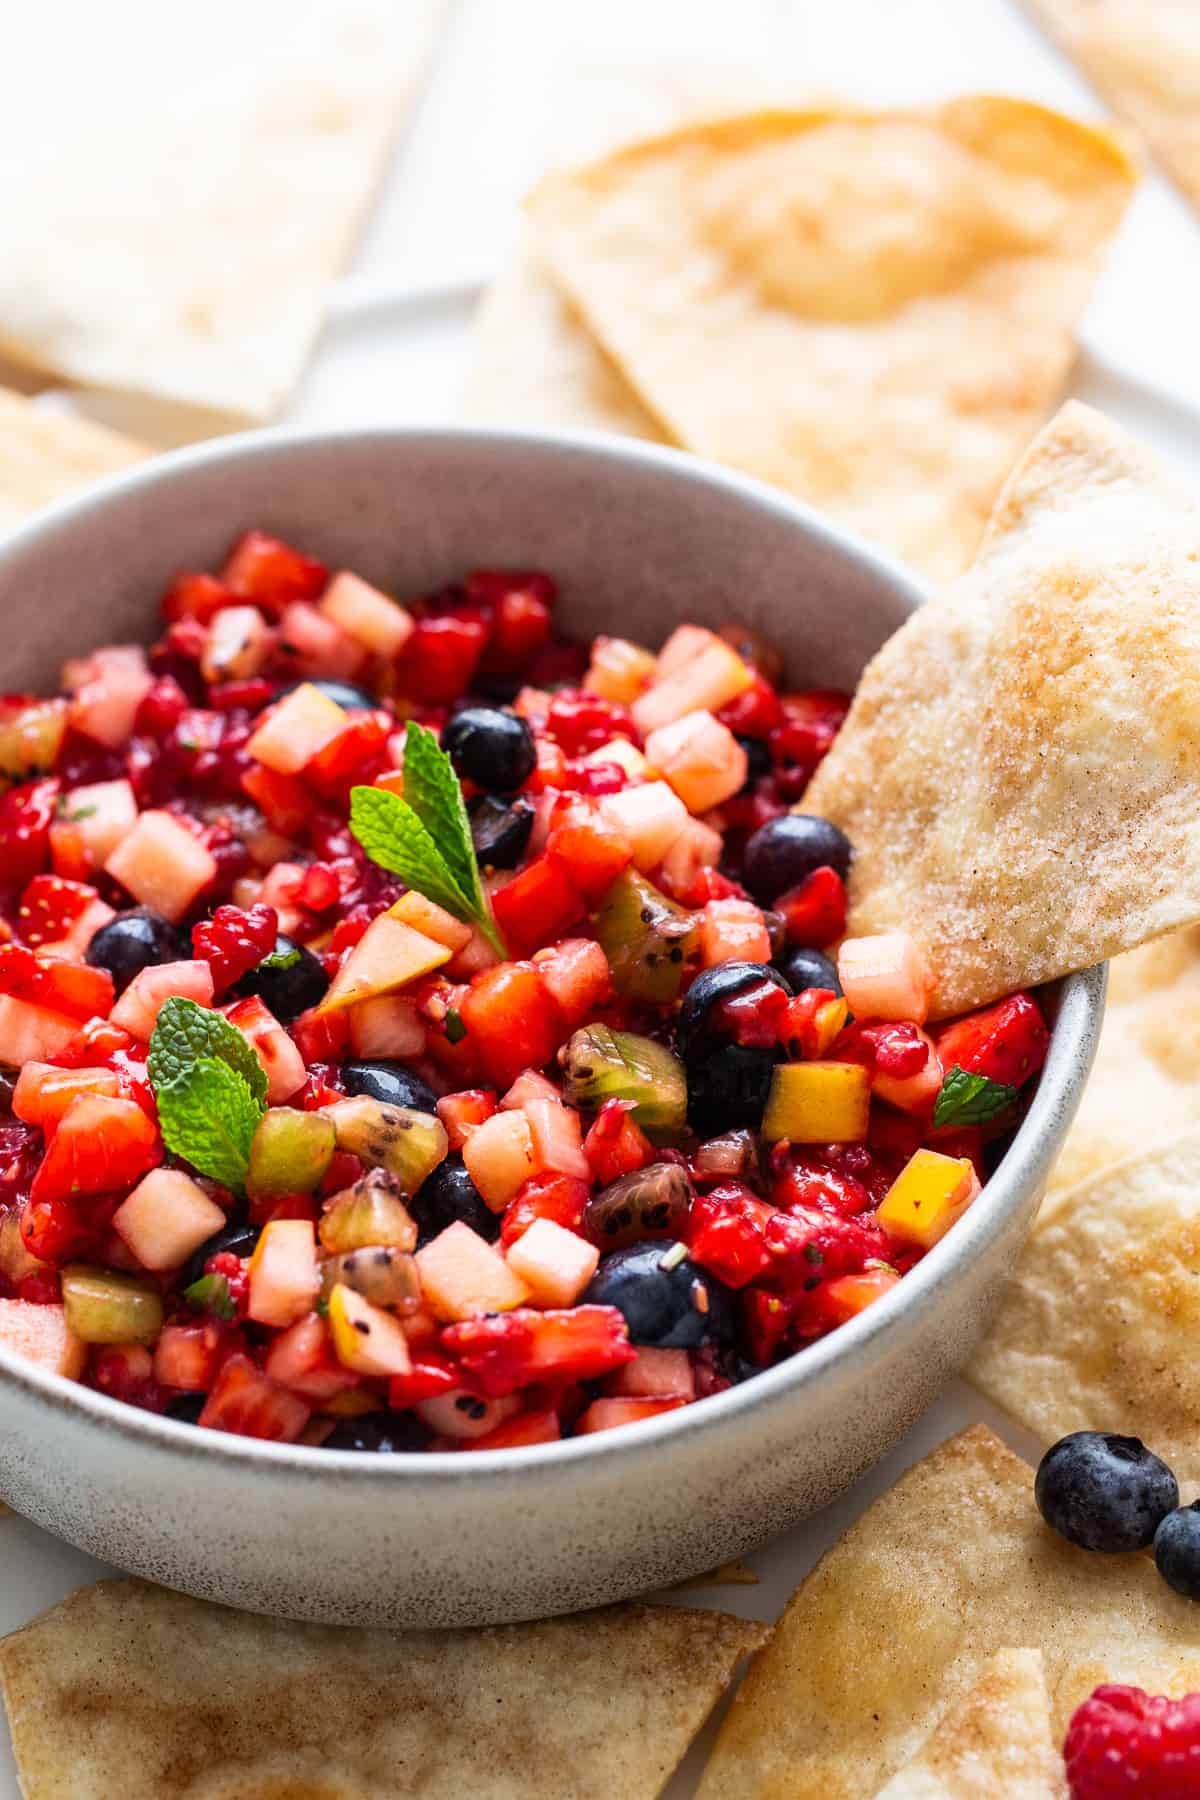 A cinnamon chip scooping some fruit salsa from a serving bowl.